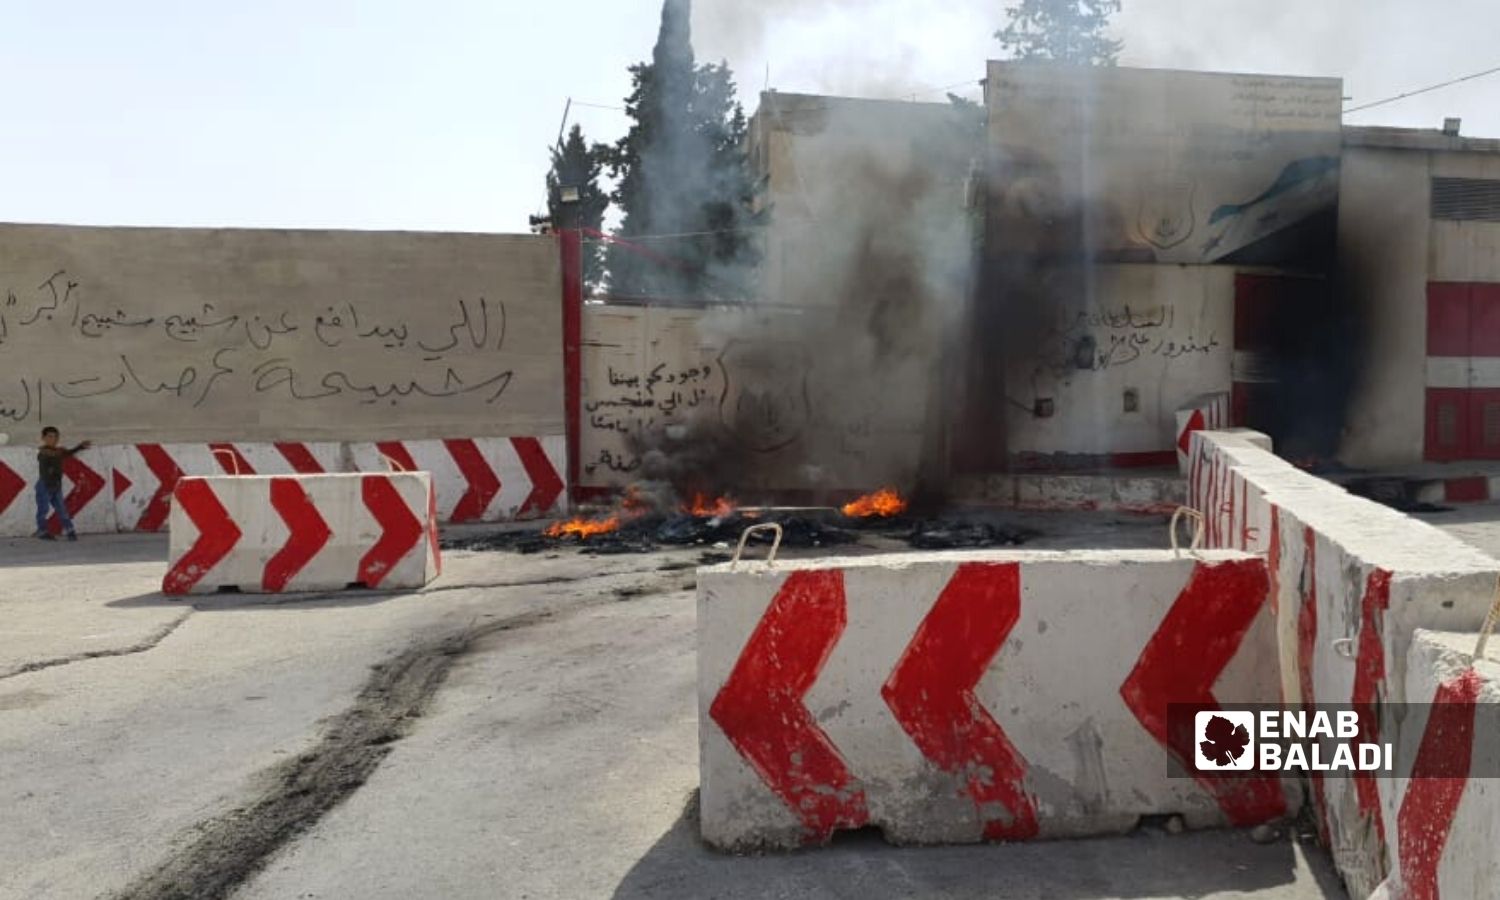 Closing the headquarters of the Military Police and setting tires on fire in front of it in the city of al-Bab in the eastern countryside of Aleppo, in response to the release of a former Syrian regime fighter who involved in war violations - 22 May 2022 (Enab Baladi/Siraj Mohammad)